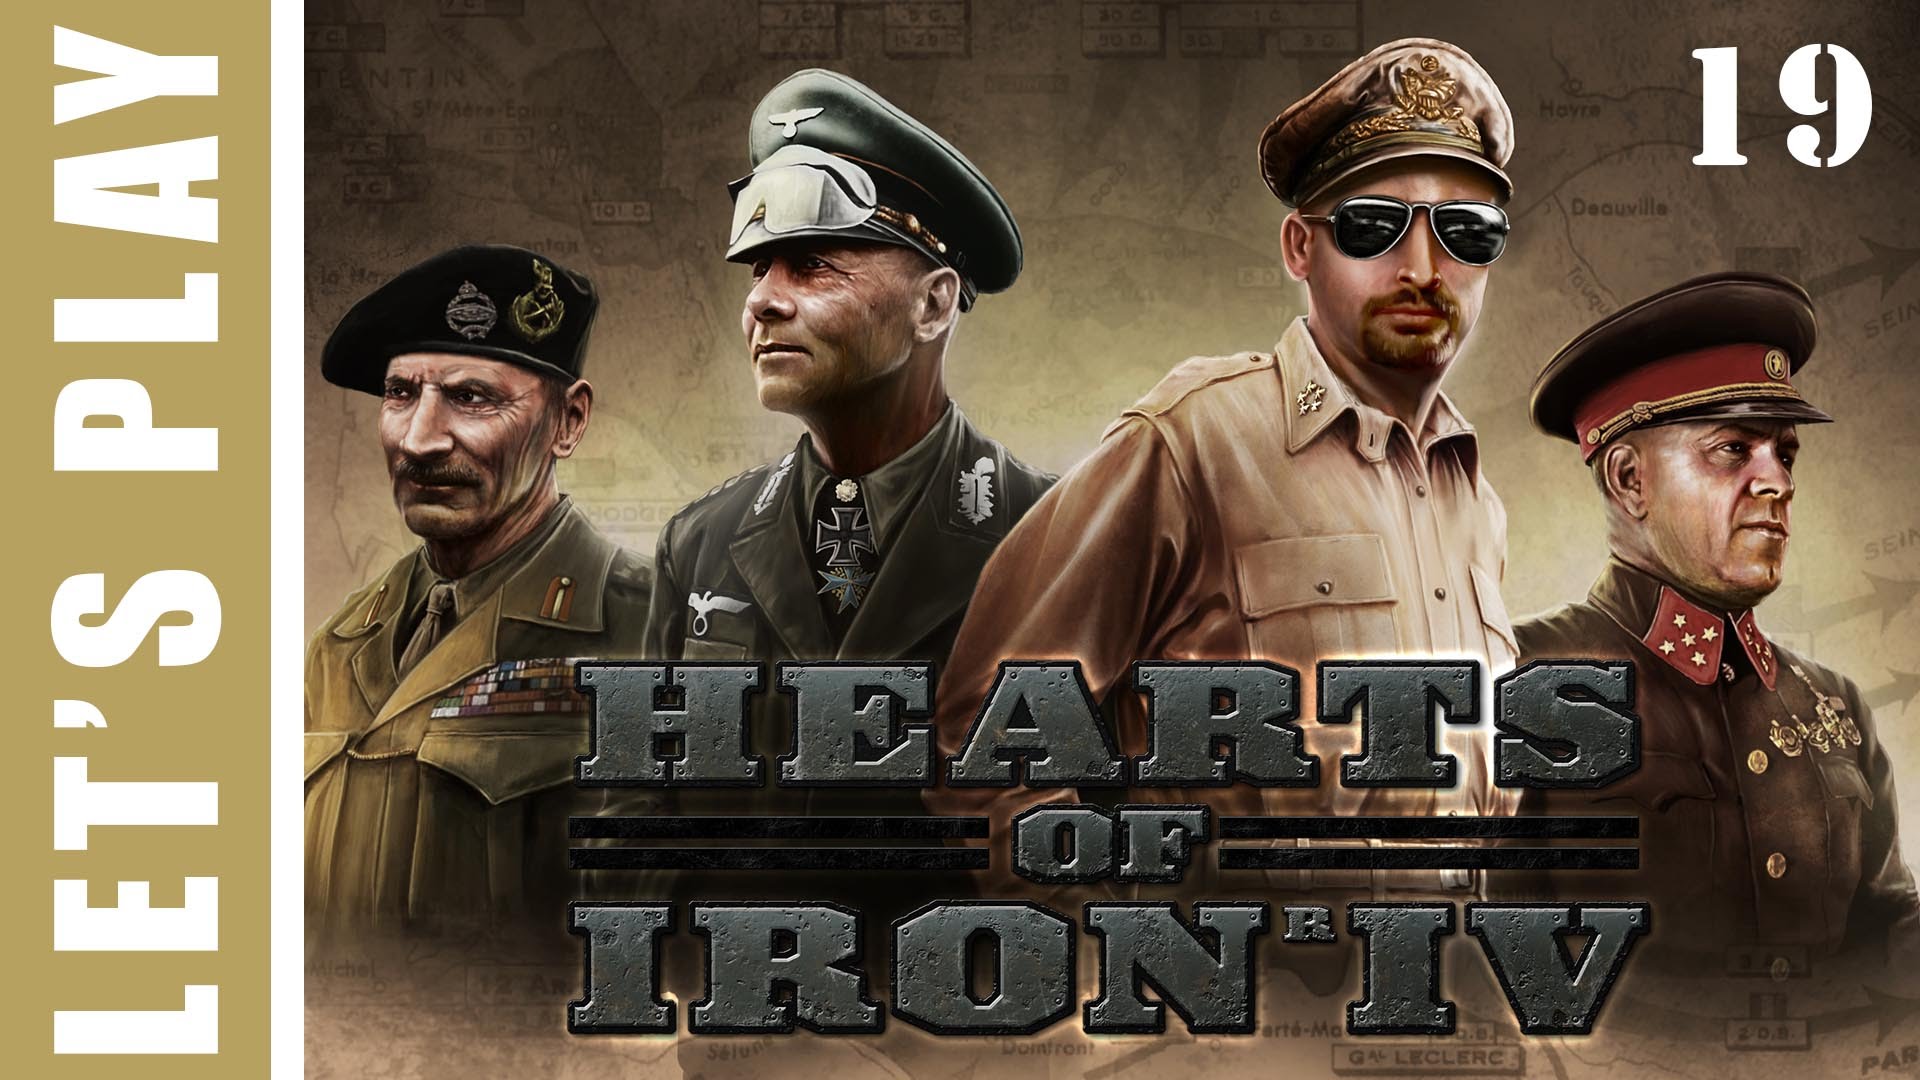 Hearts of Iron IV Germany Wins World War 2 Let’s Play 19